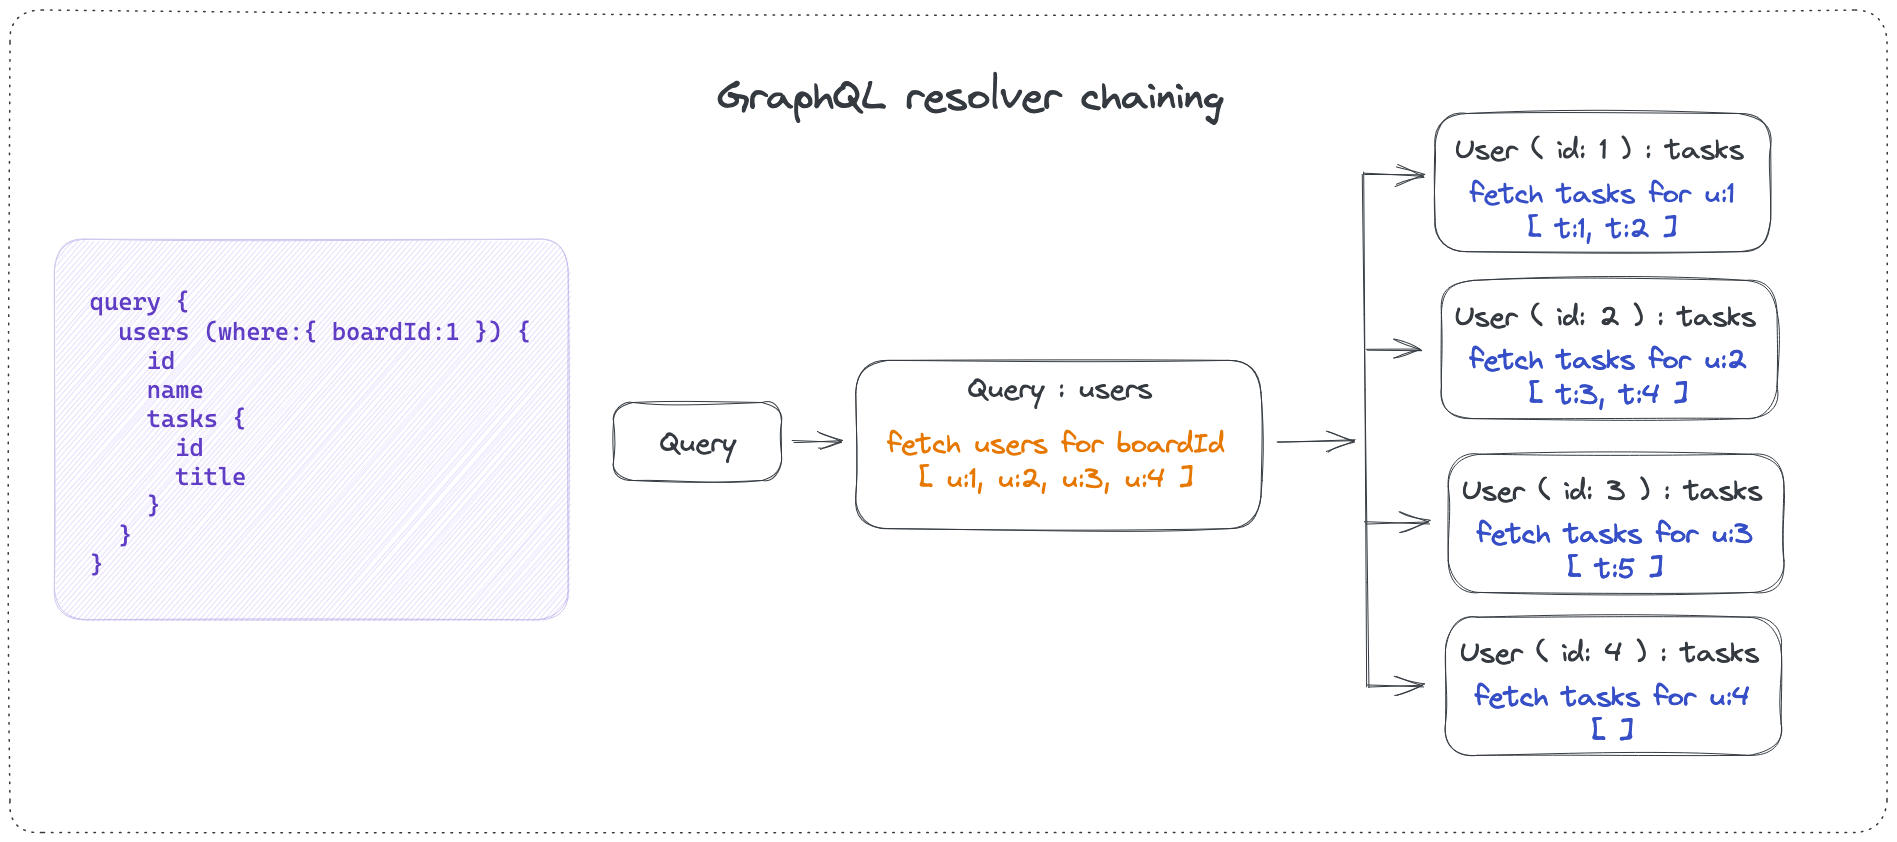 Visualizing resolver chaining for a task board